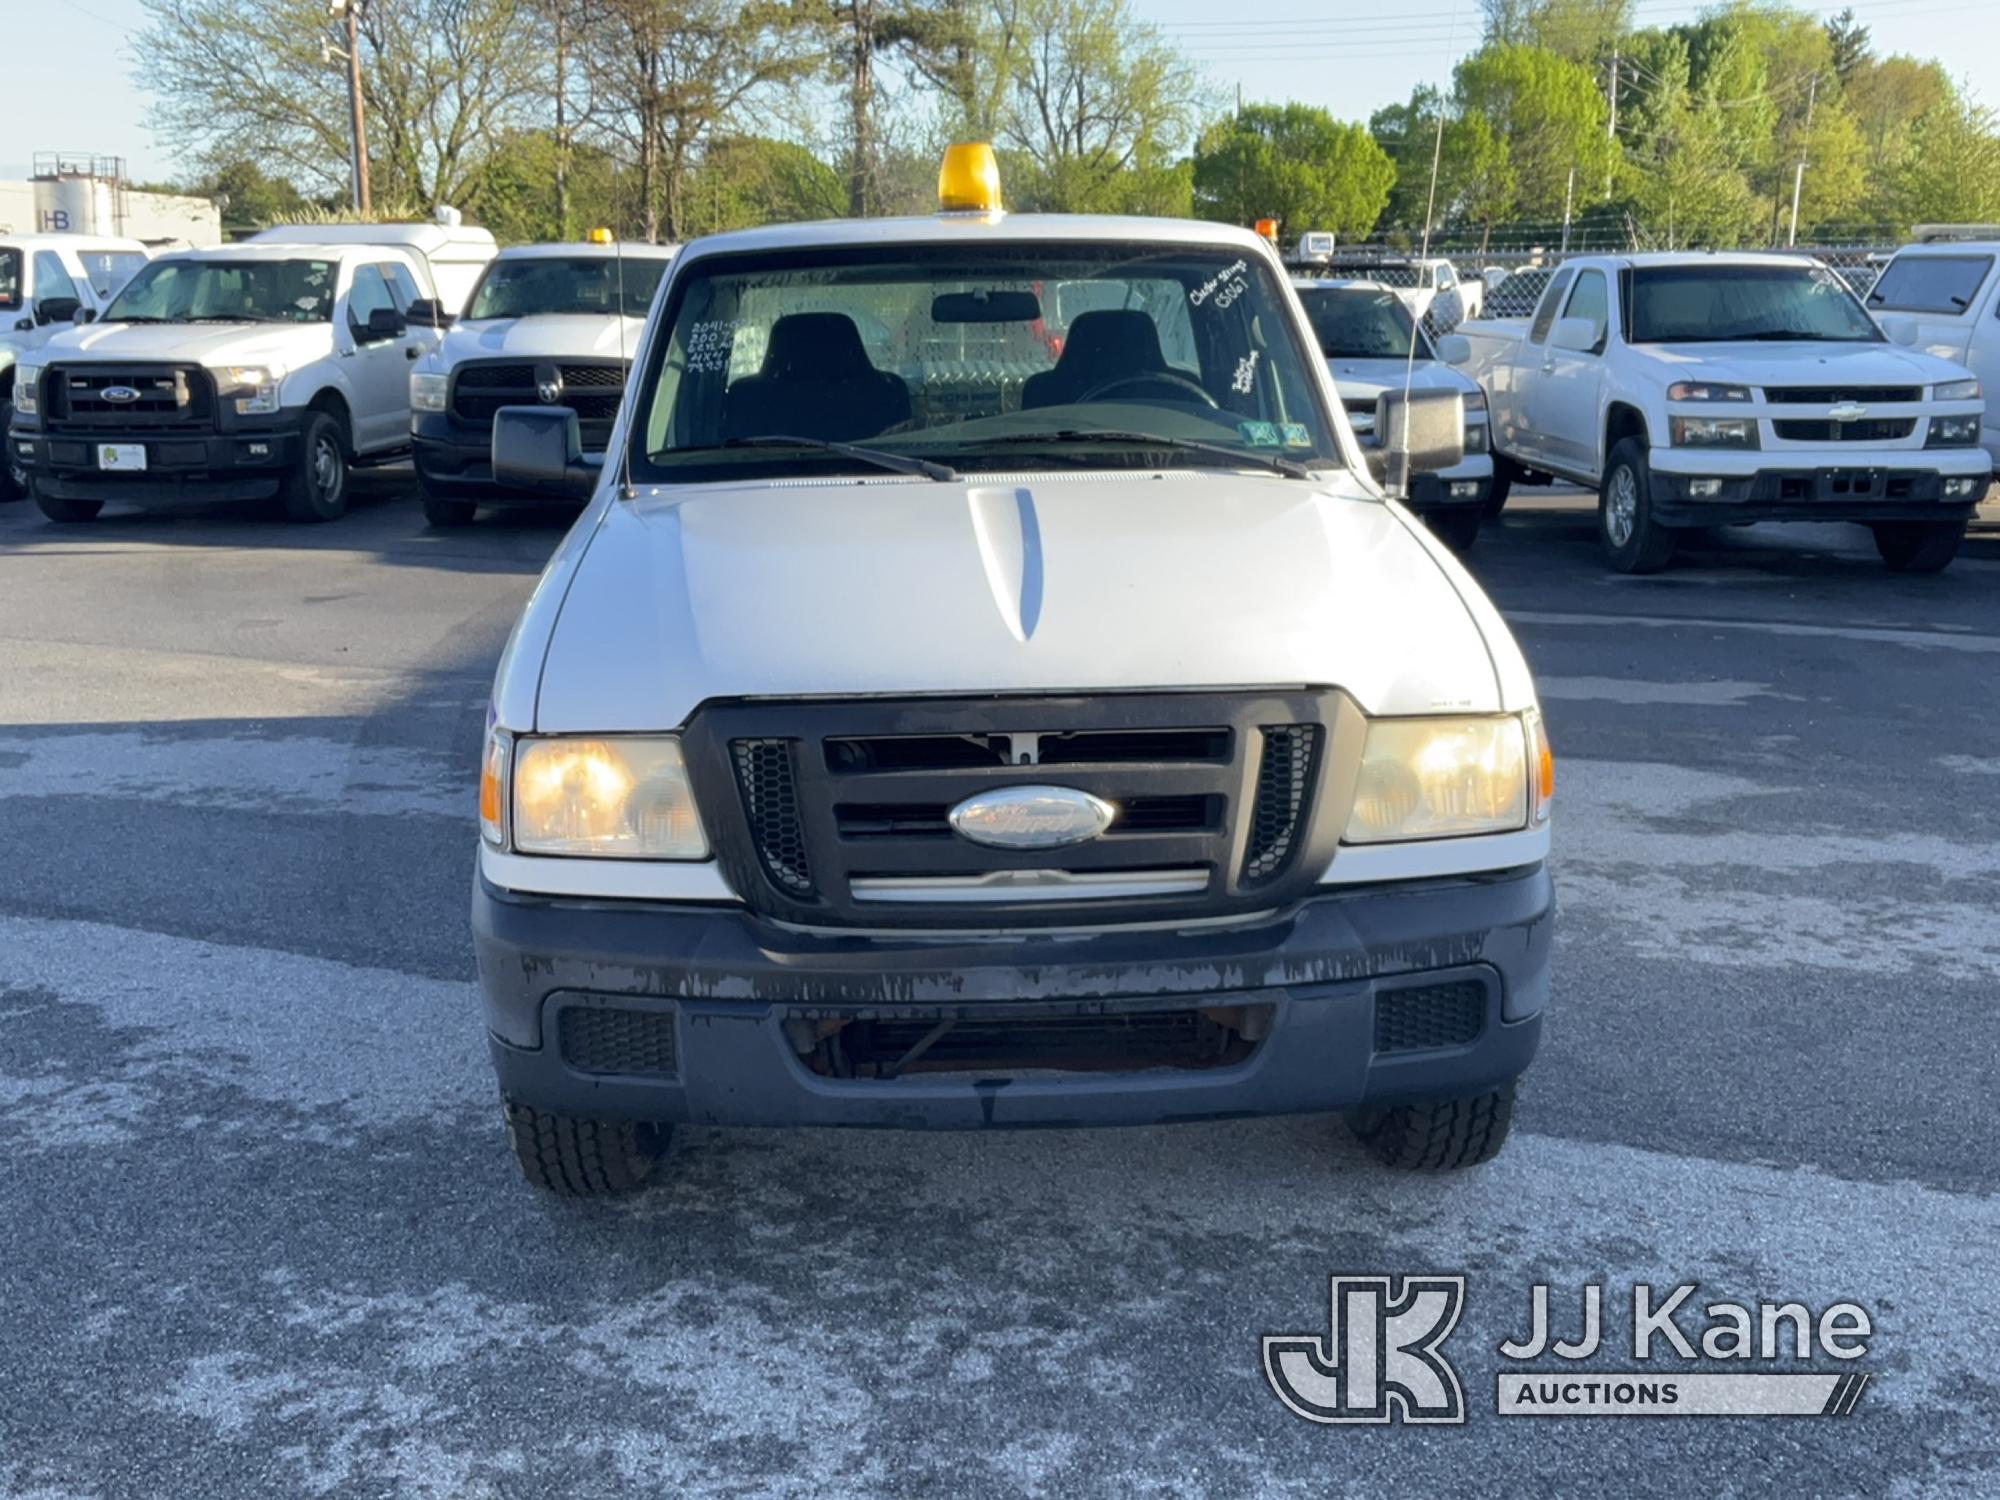 (Chester Springs, PA) 2007 Ford Ranger 4x4 Pickup Truck Runs & Moves, Body & Rust Damage) (Inspectio